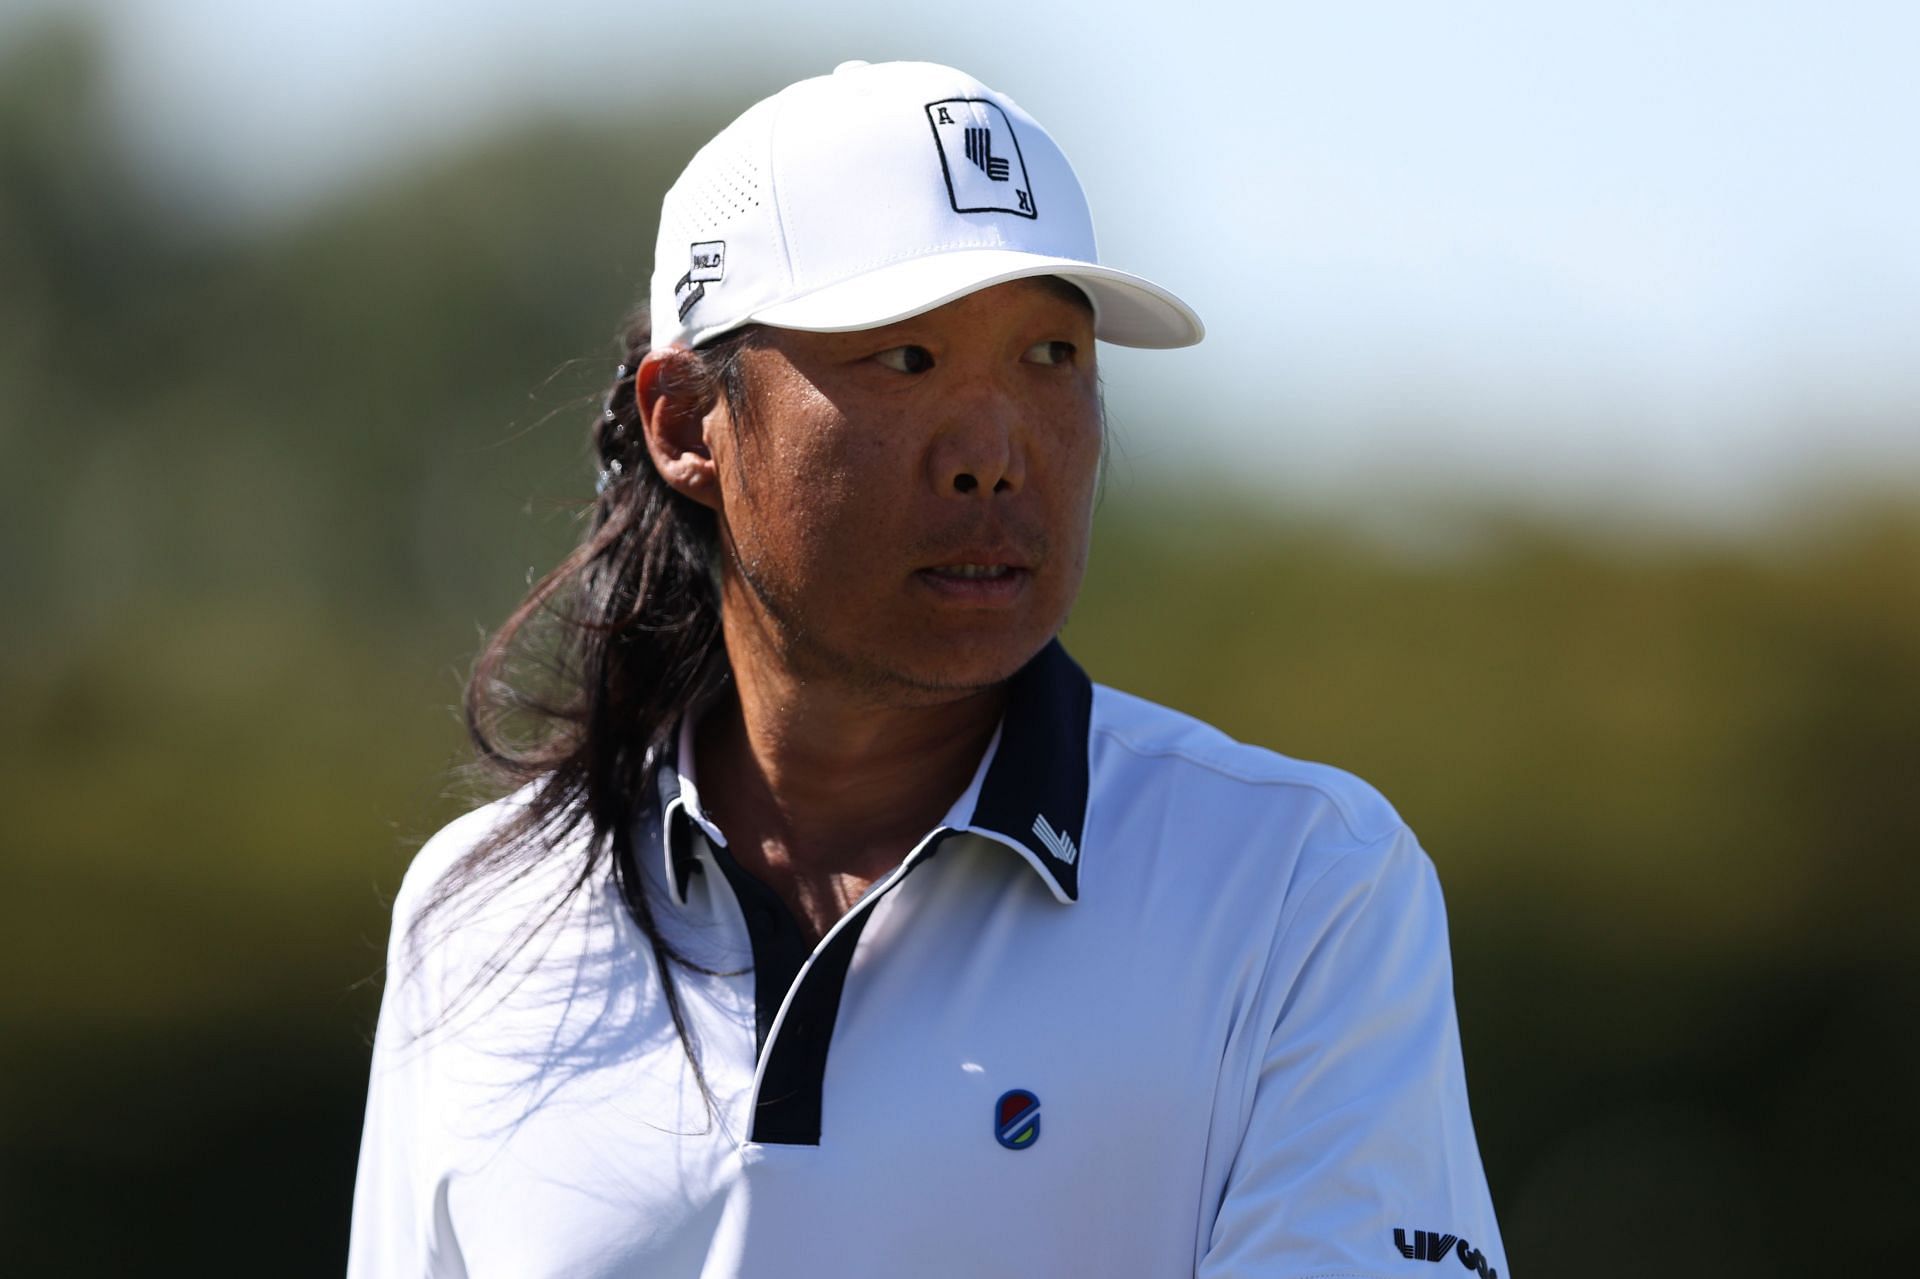 Anthony Kim opened up about his fans